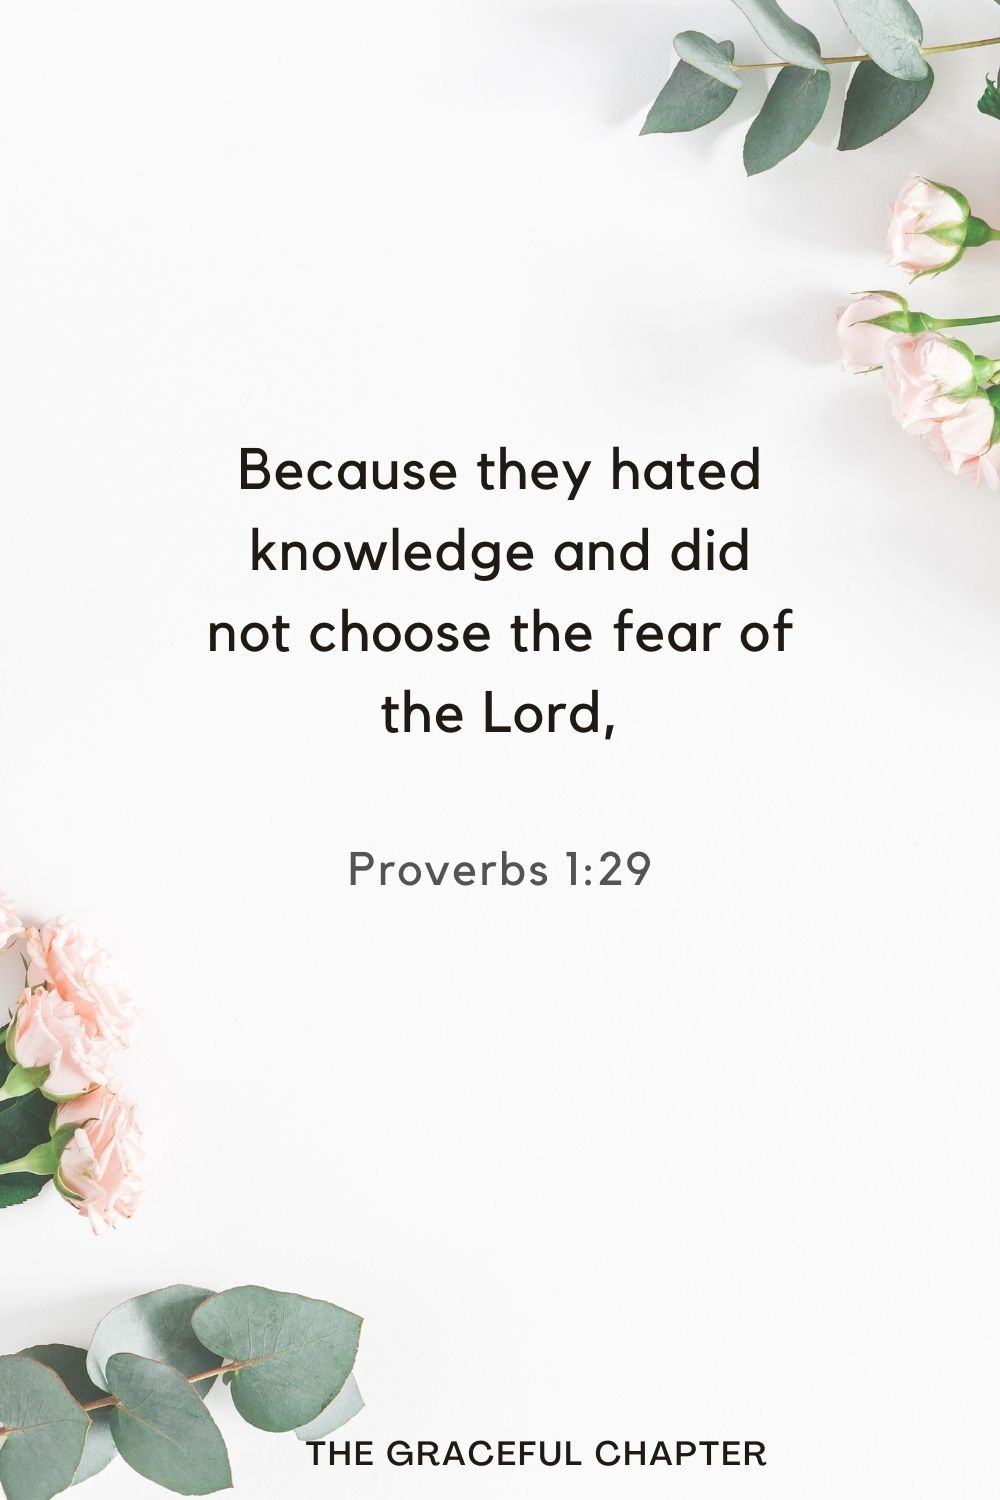 Because they hated knowledge and did not choose the fear of the Lord, Proverbs 1:29